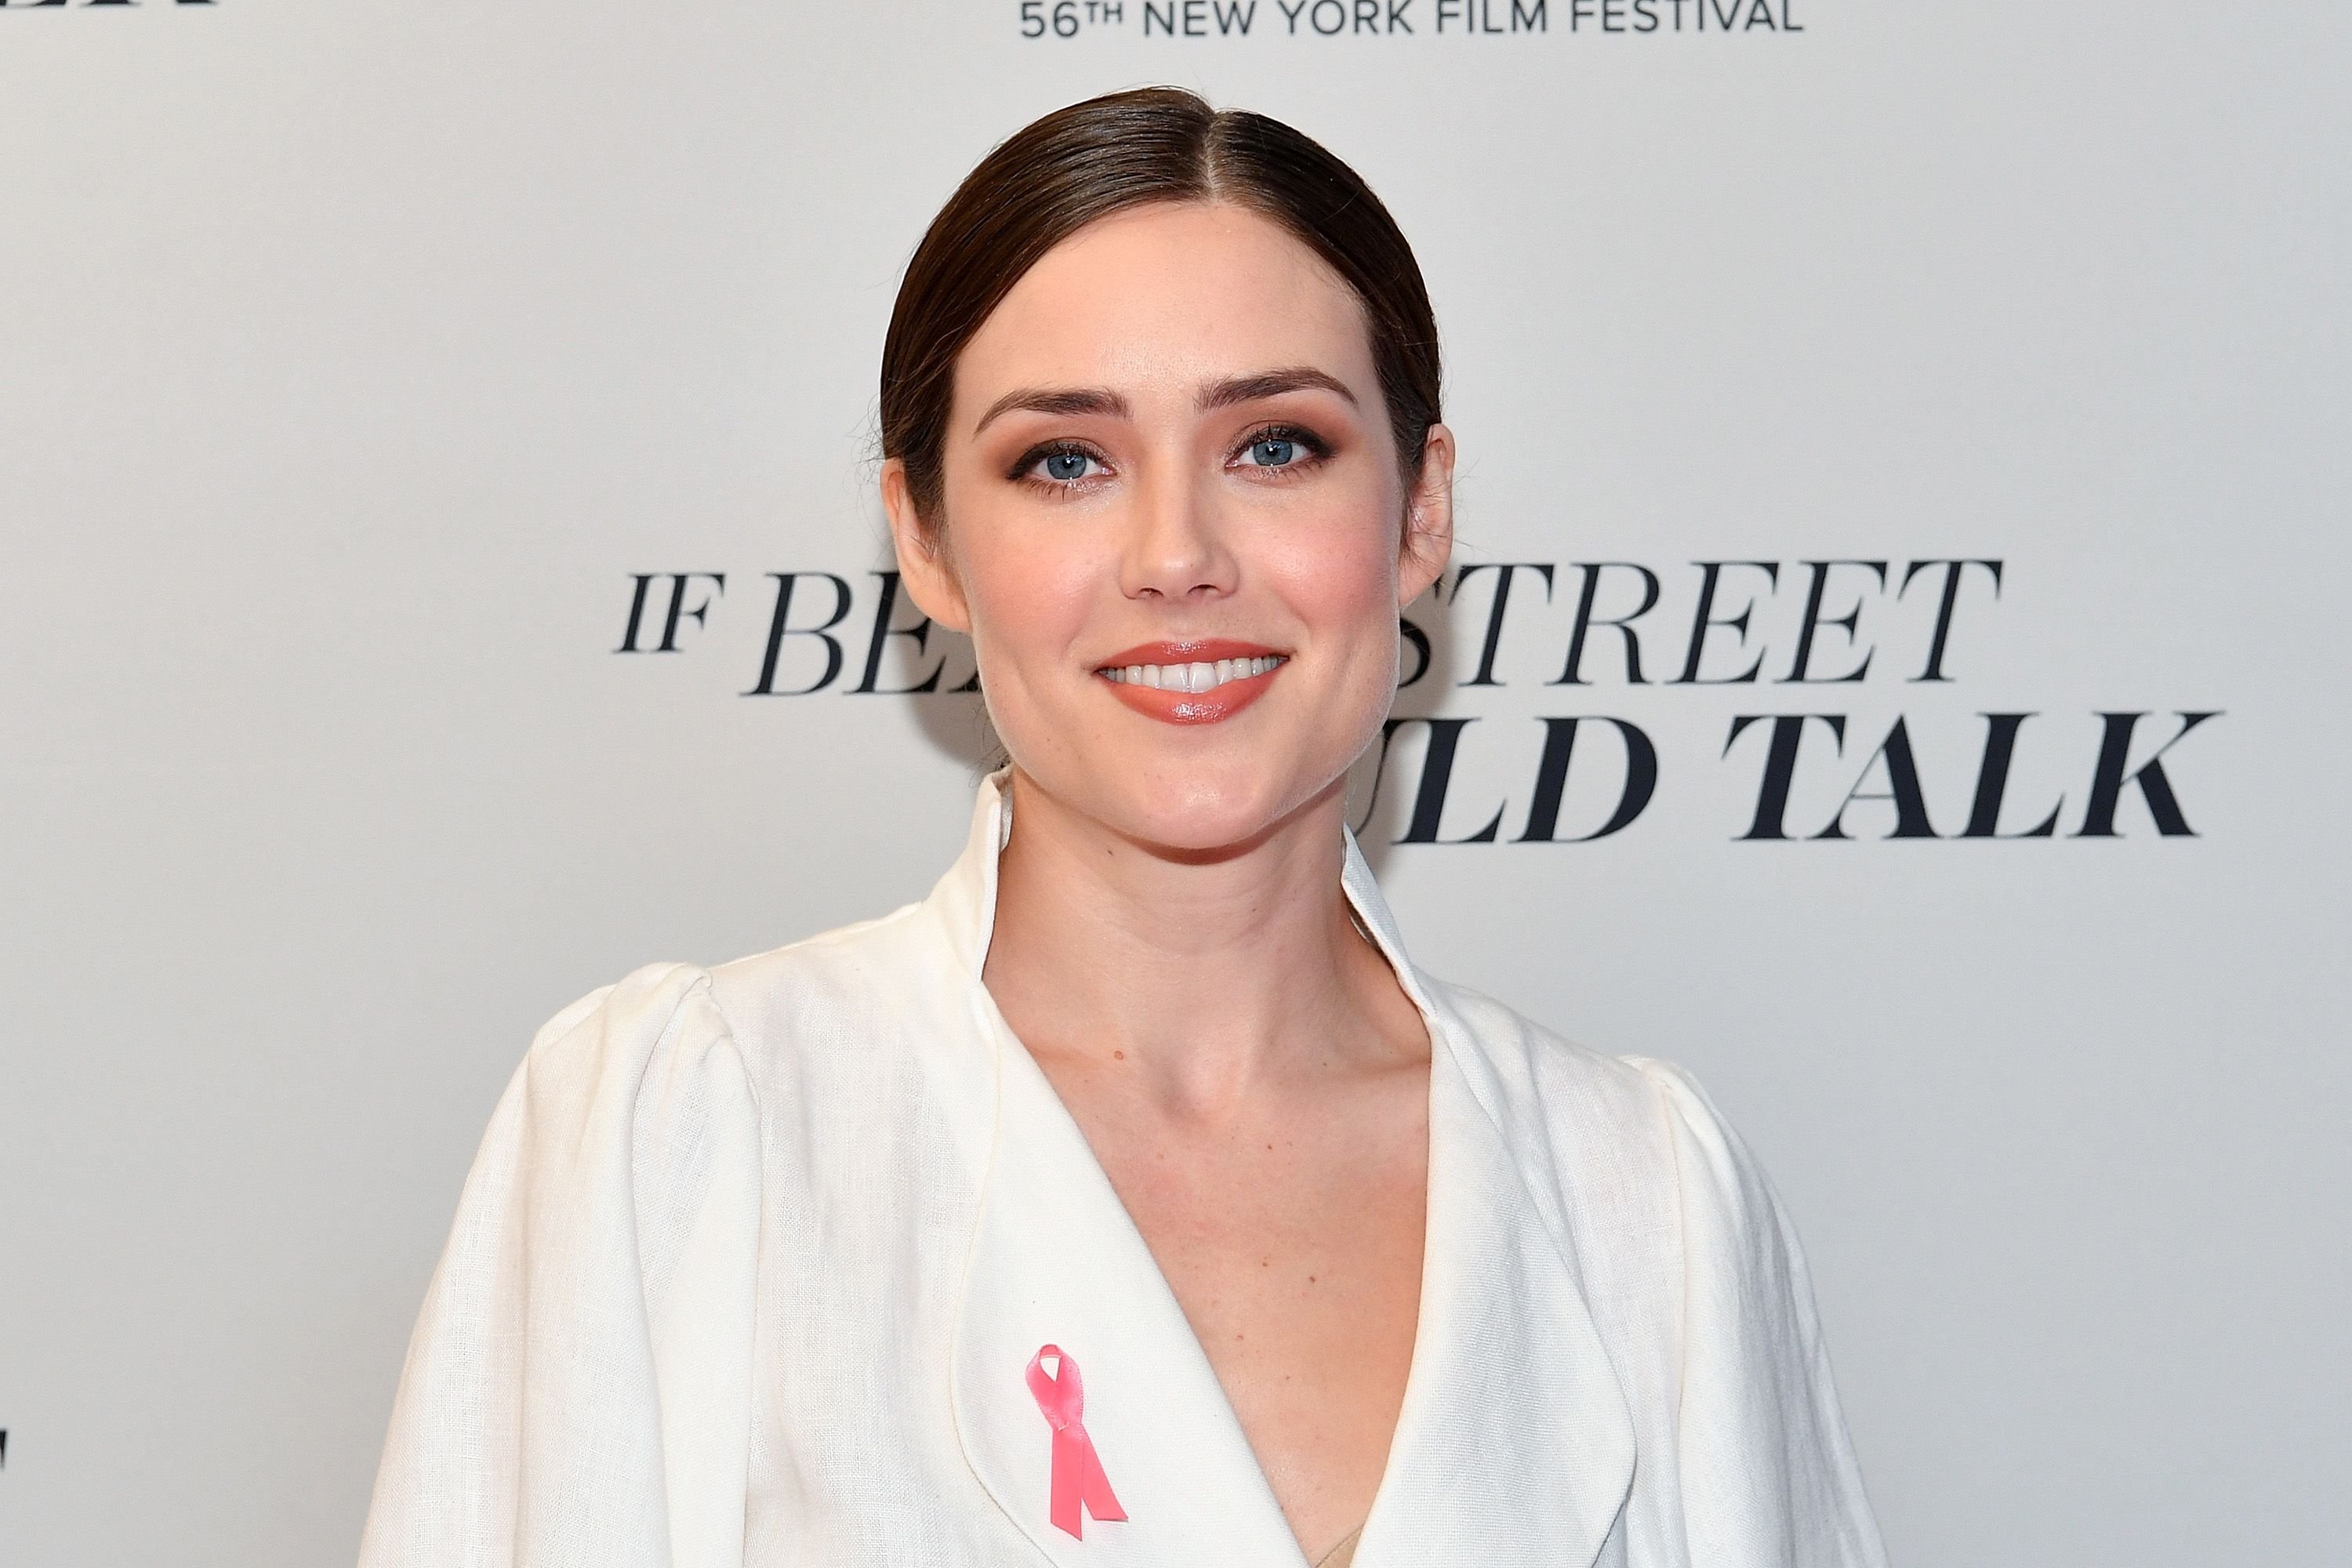 Megan Boone at the premiere of "If Beale Street Could Talk" at the 56th New York Film Festival in 2018 | Source: Getty Images